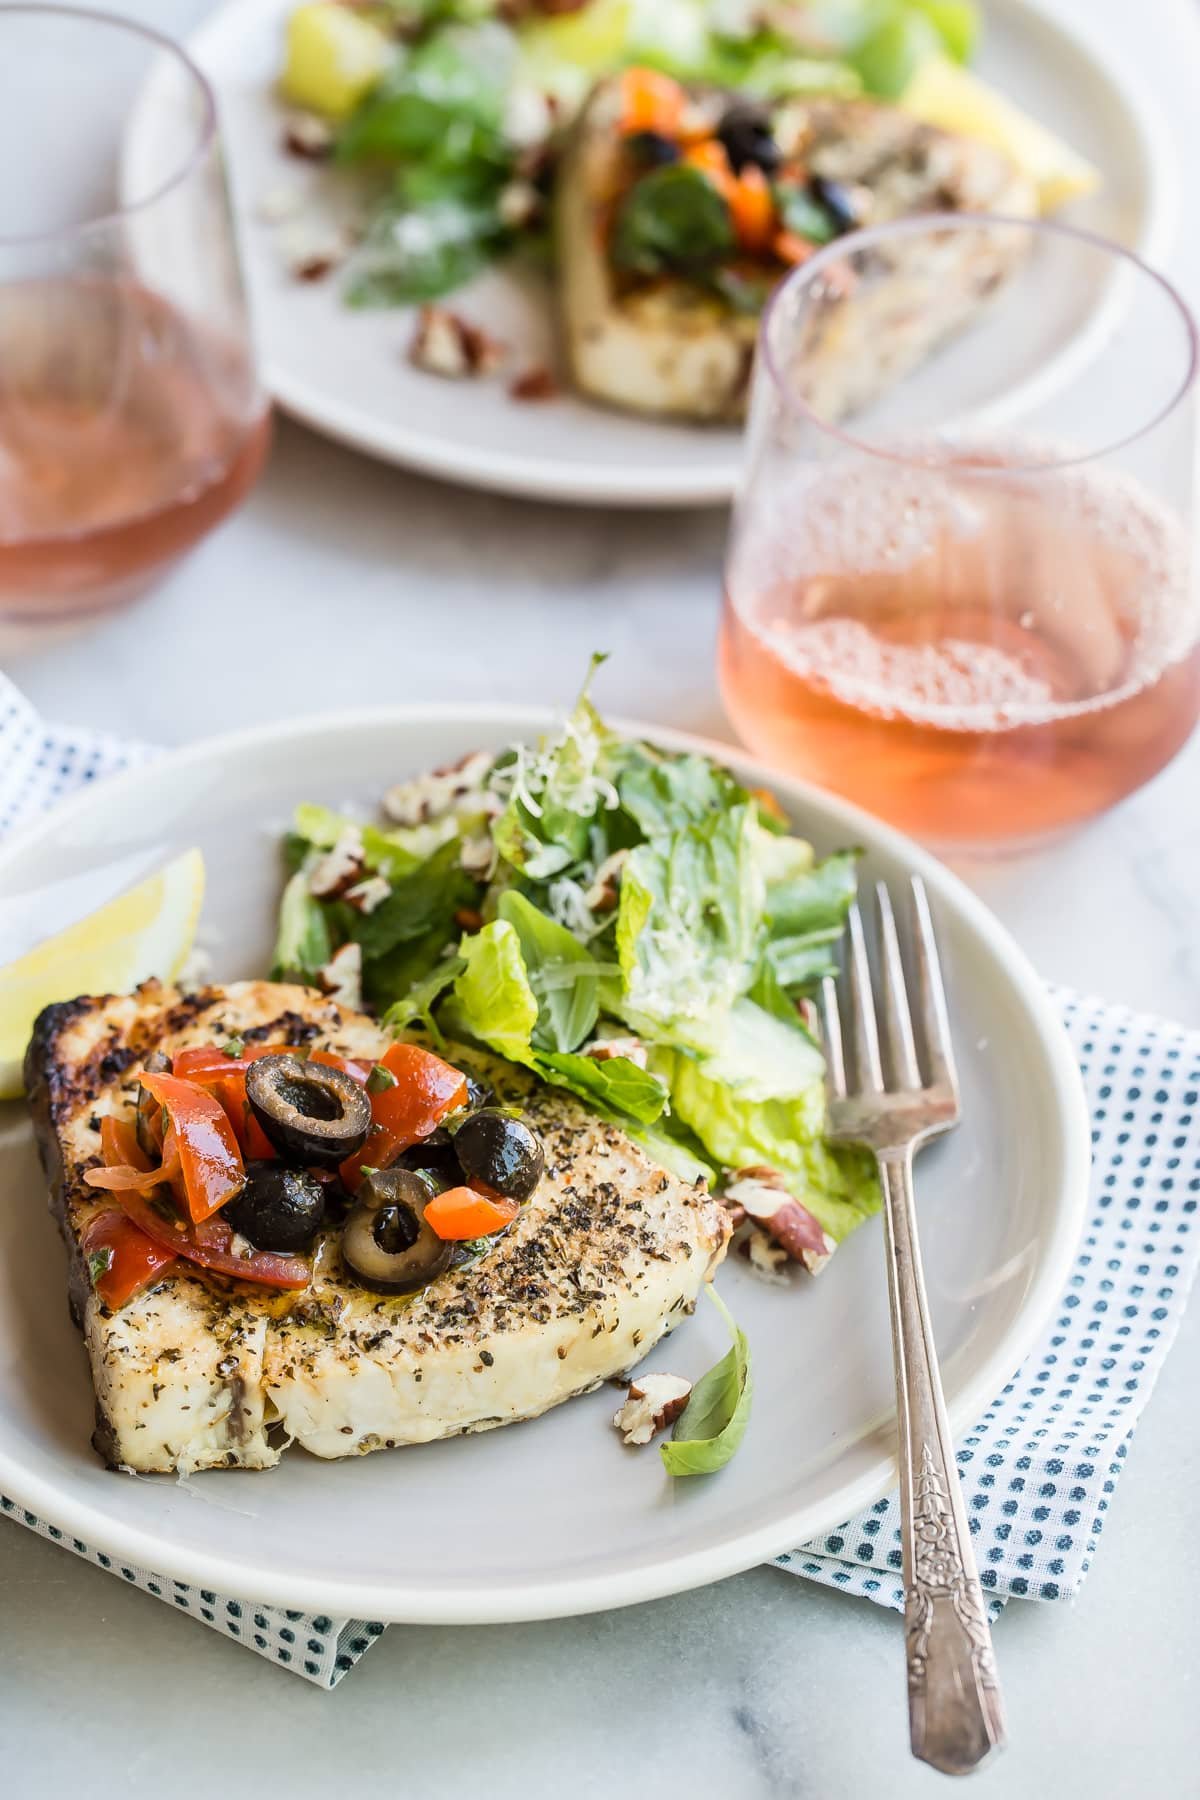 A piece of grilled swordfish on a plate with olive topping and green salad.